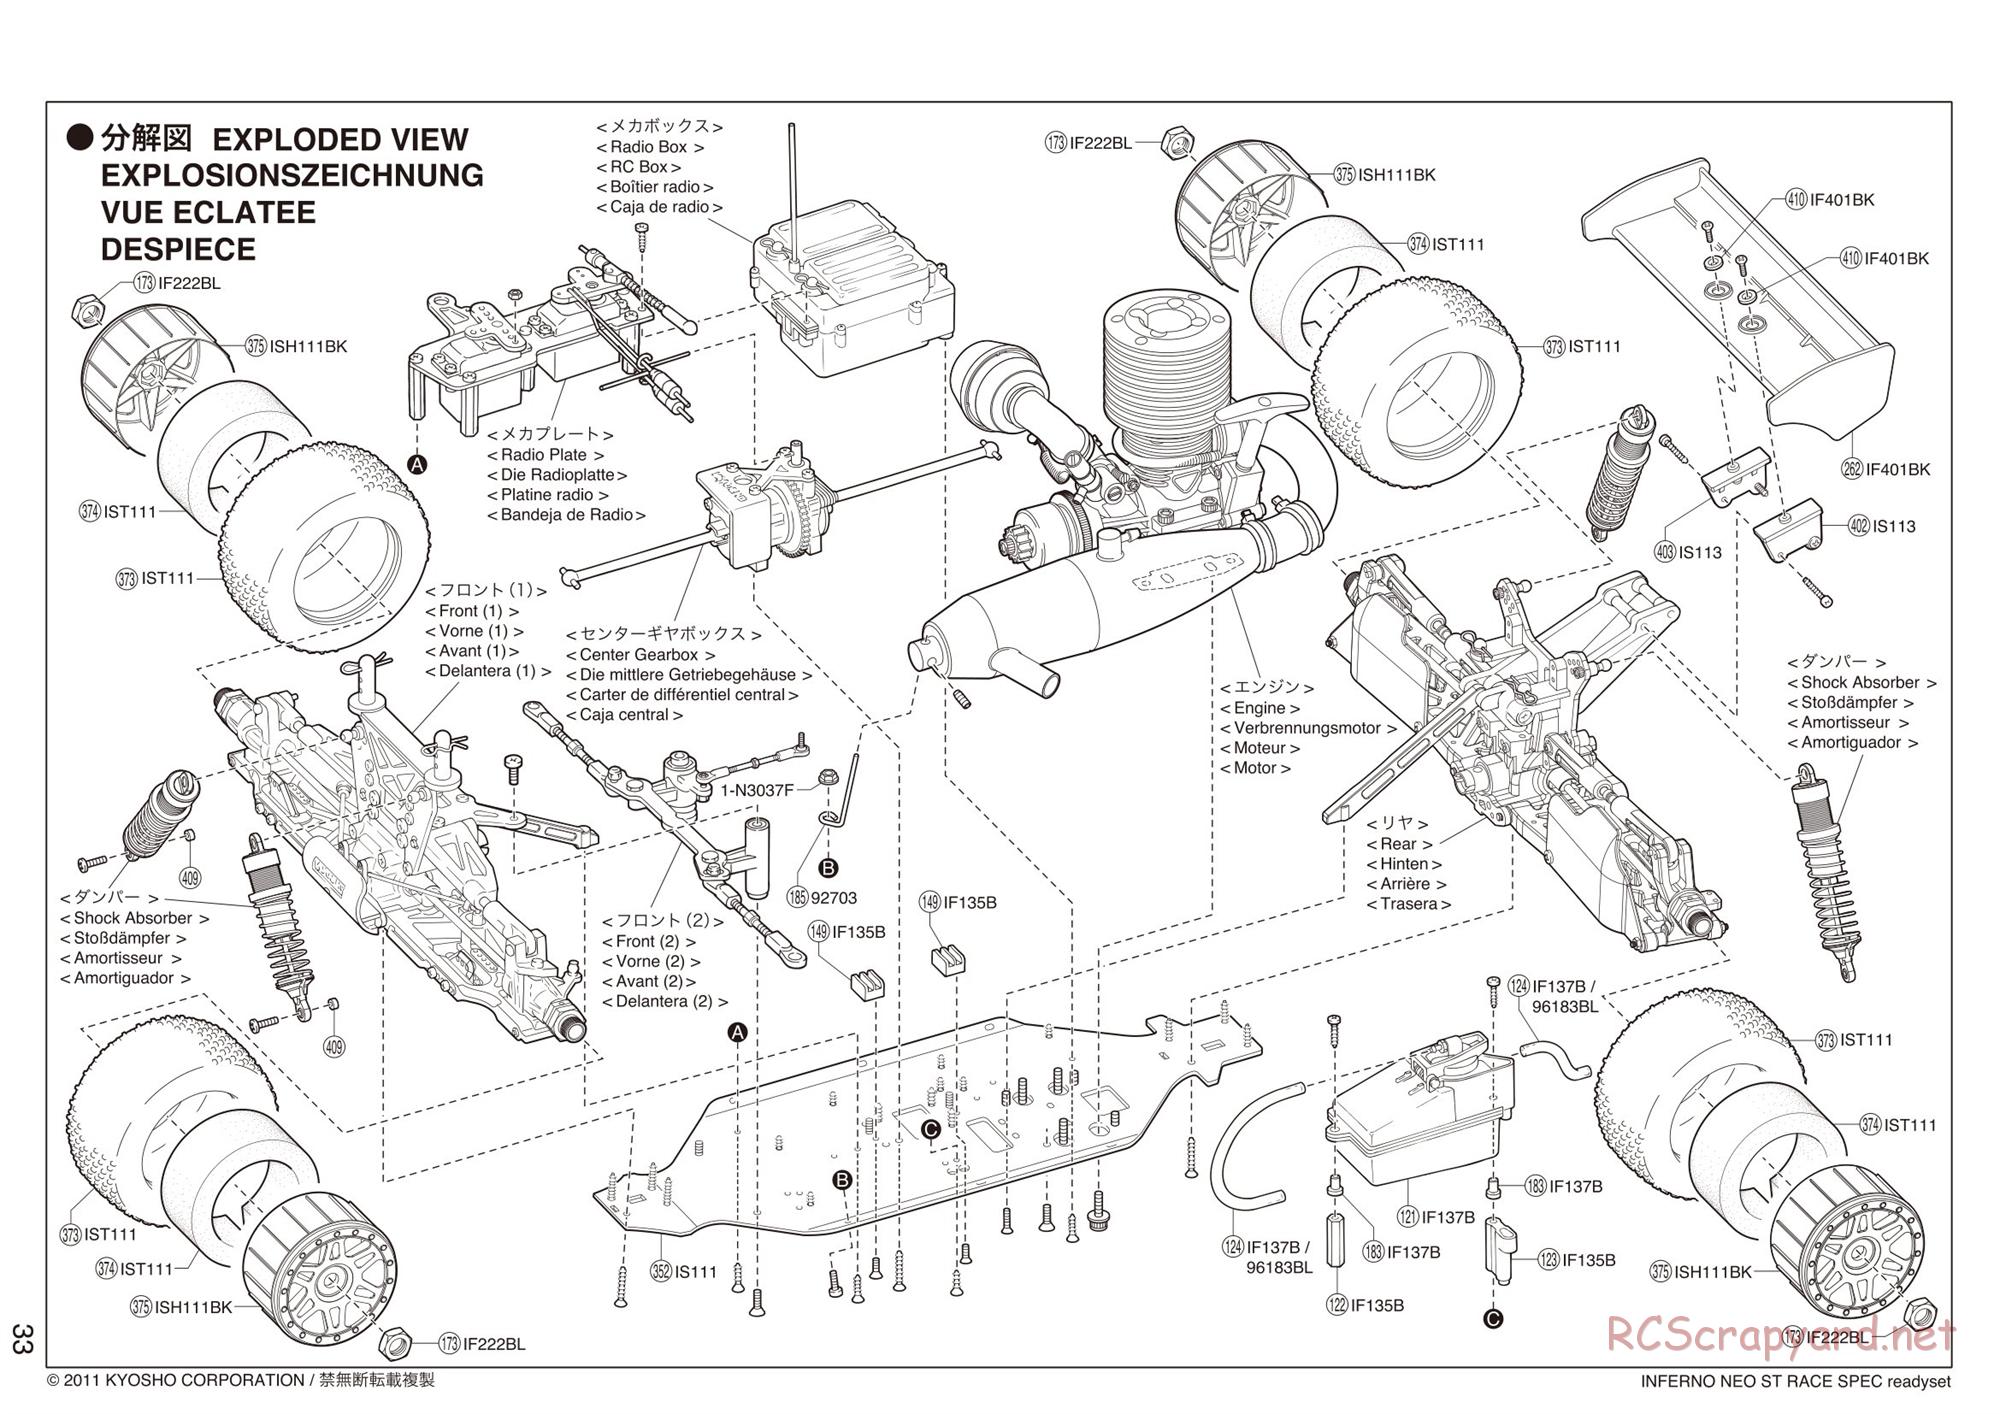 Kyosho - Inferno Neo ST - Exploded Views - Page 1